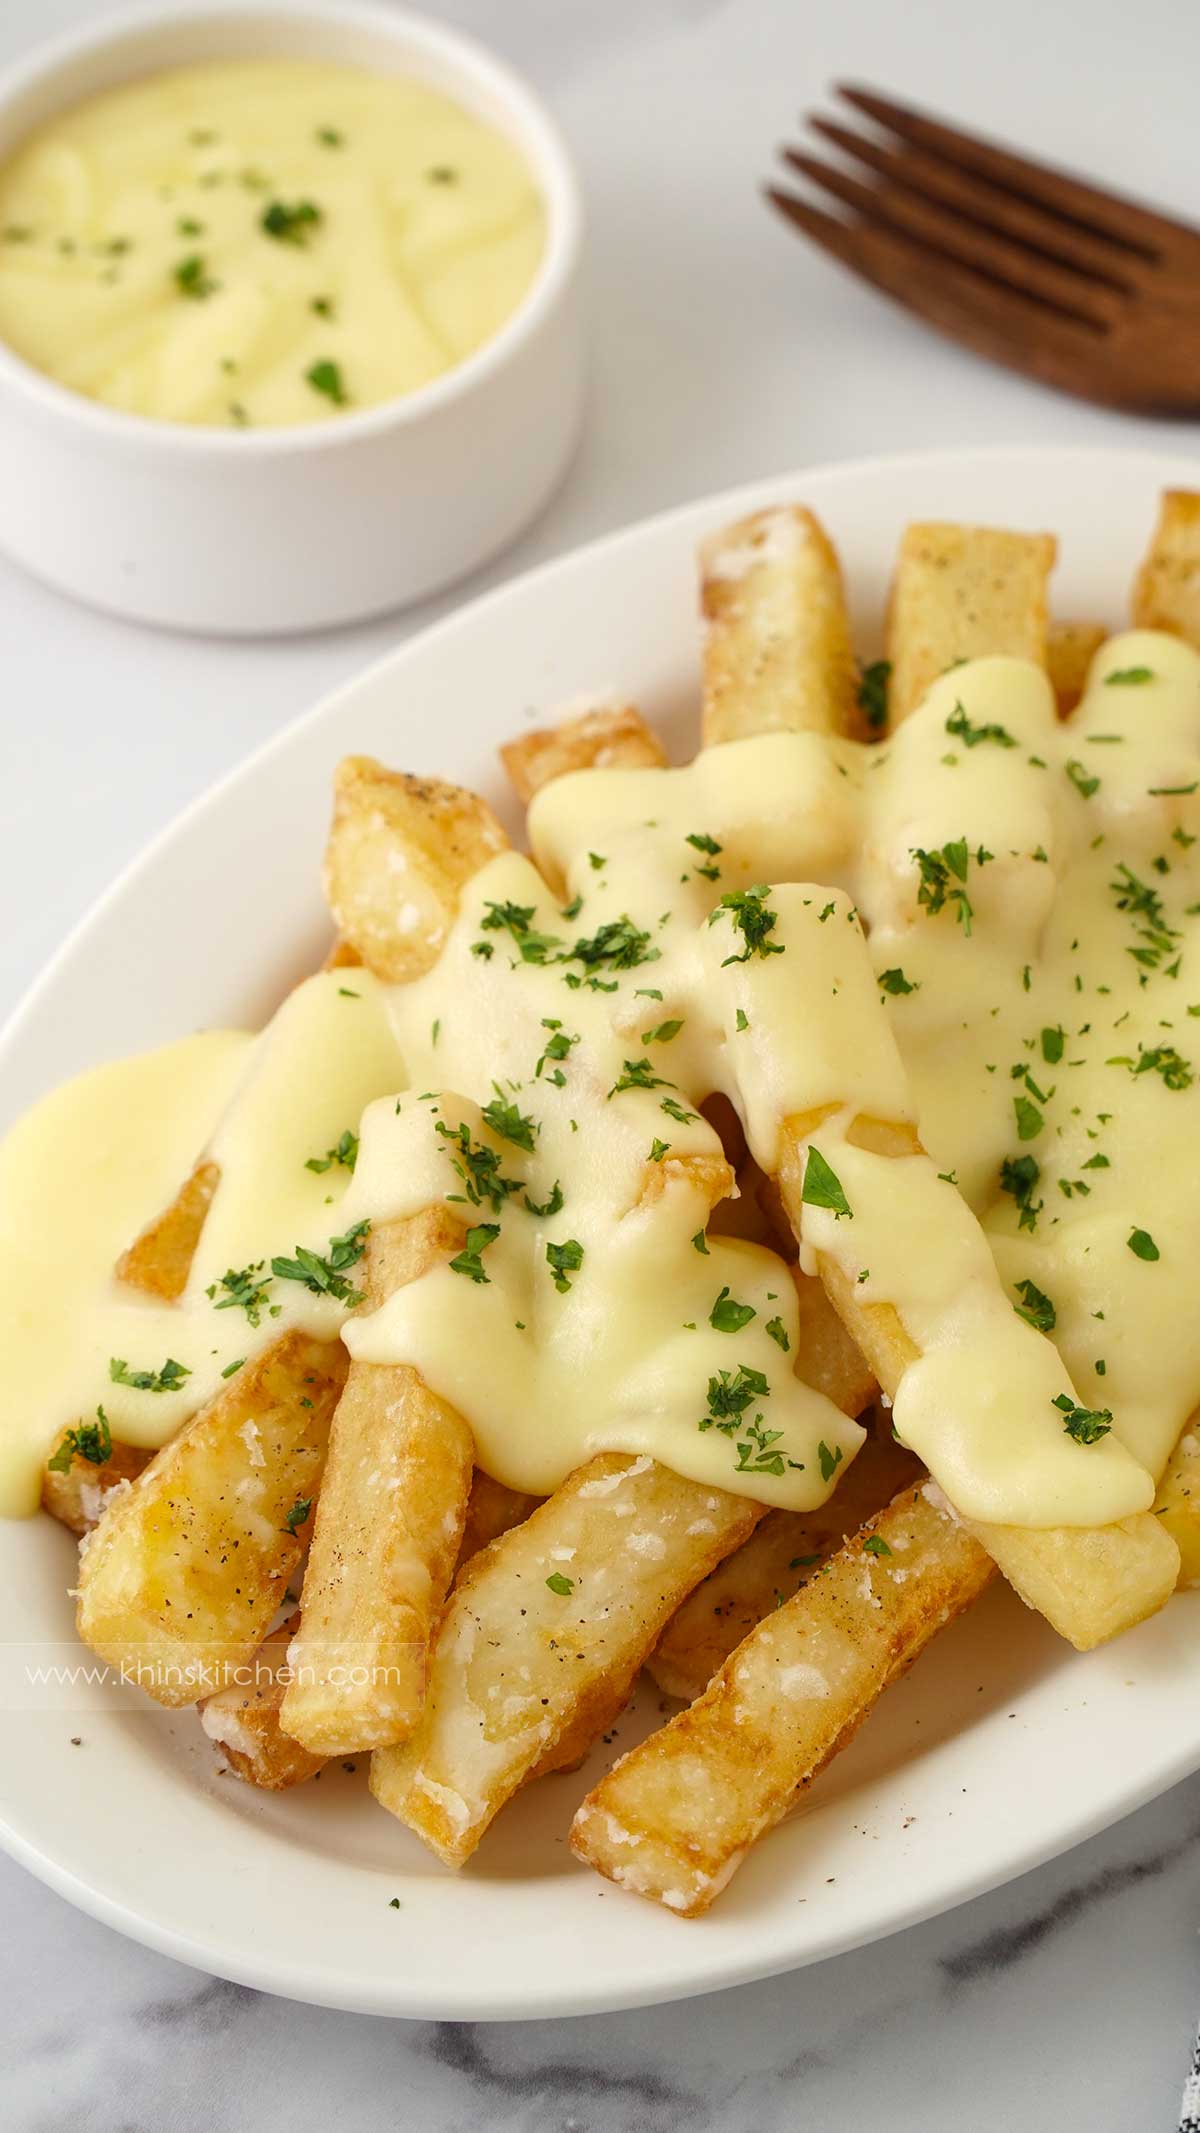 A white plate containing fried homemade cheesy chips and chopped parsley.